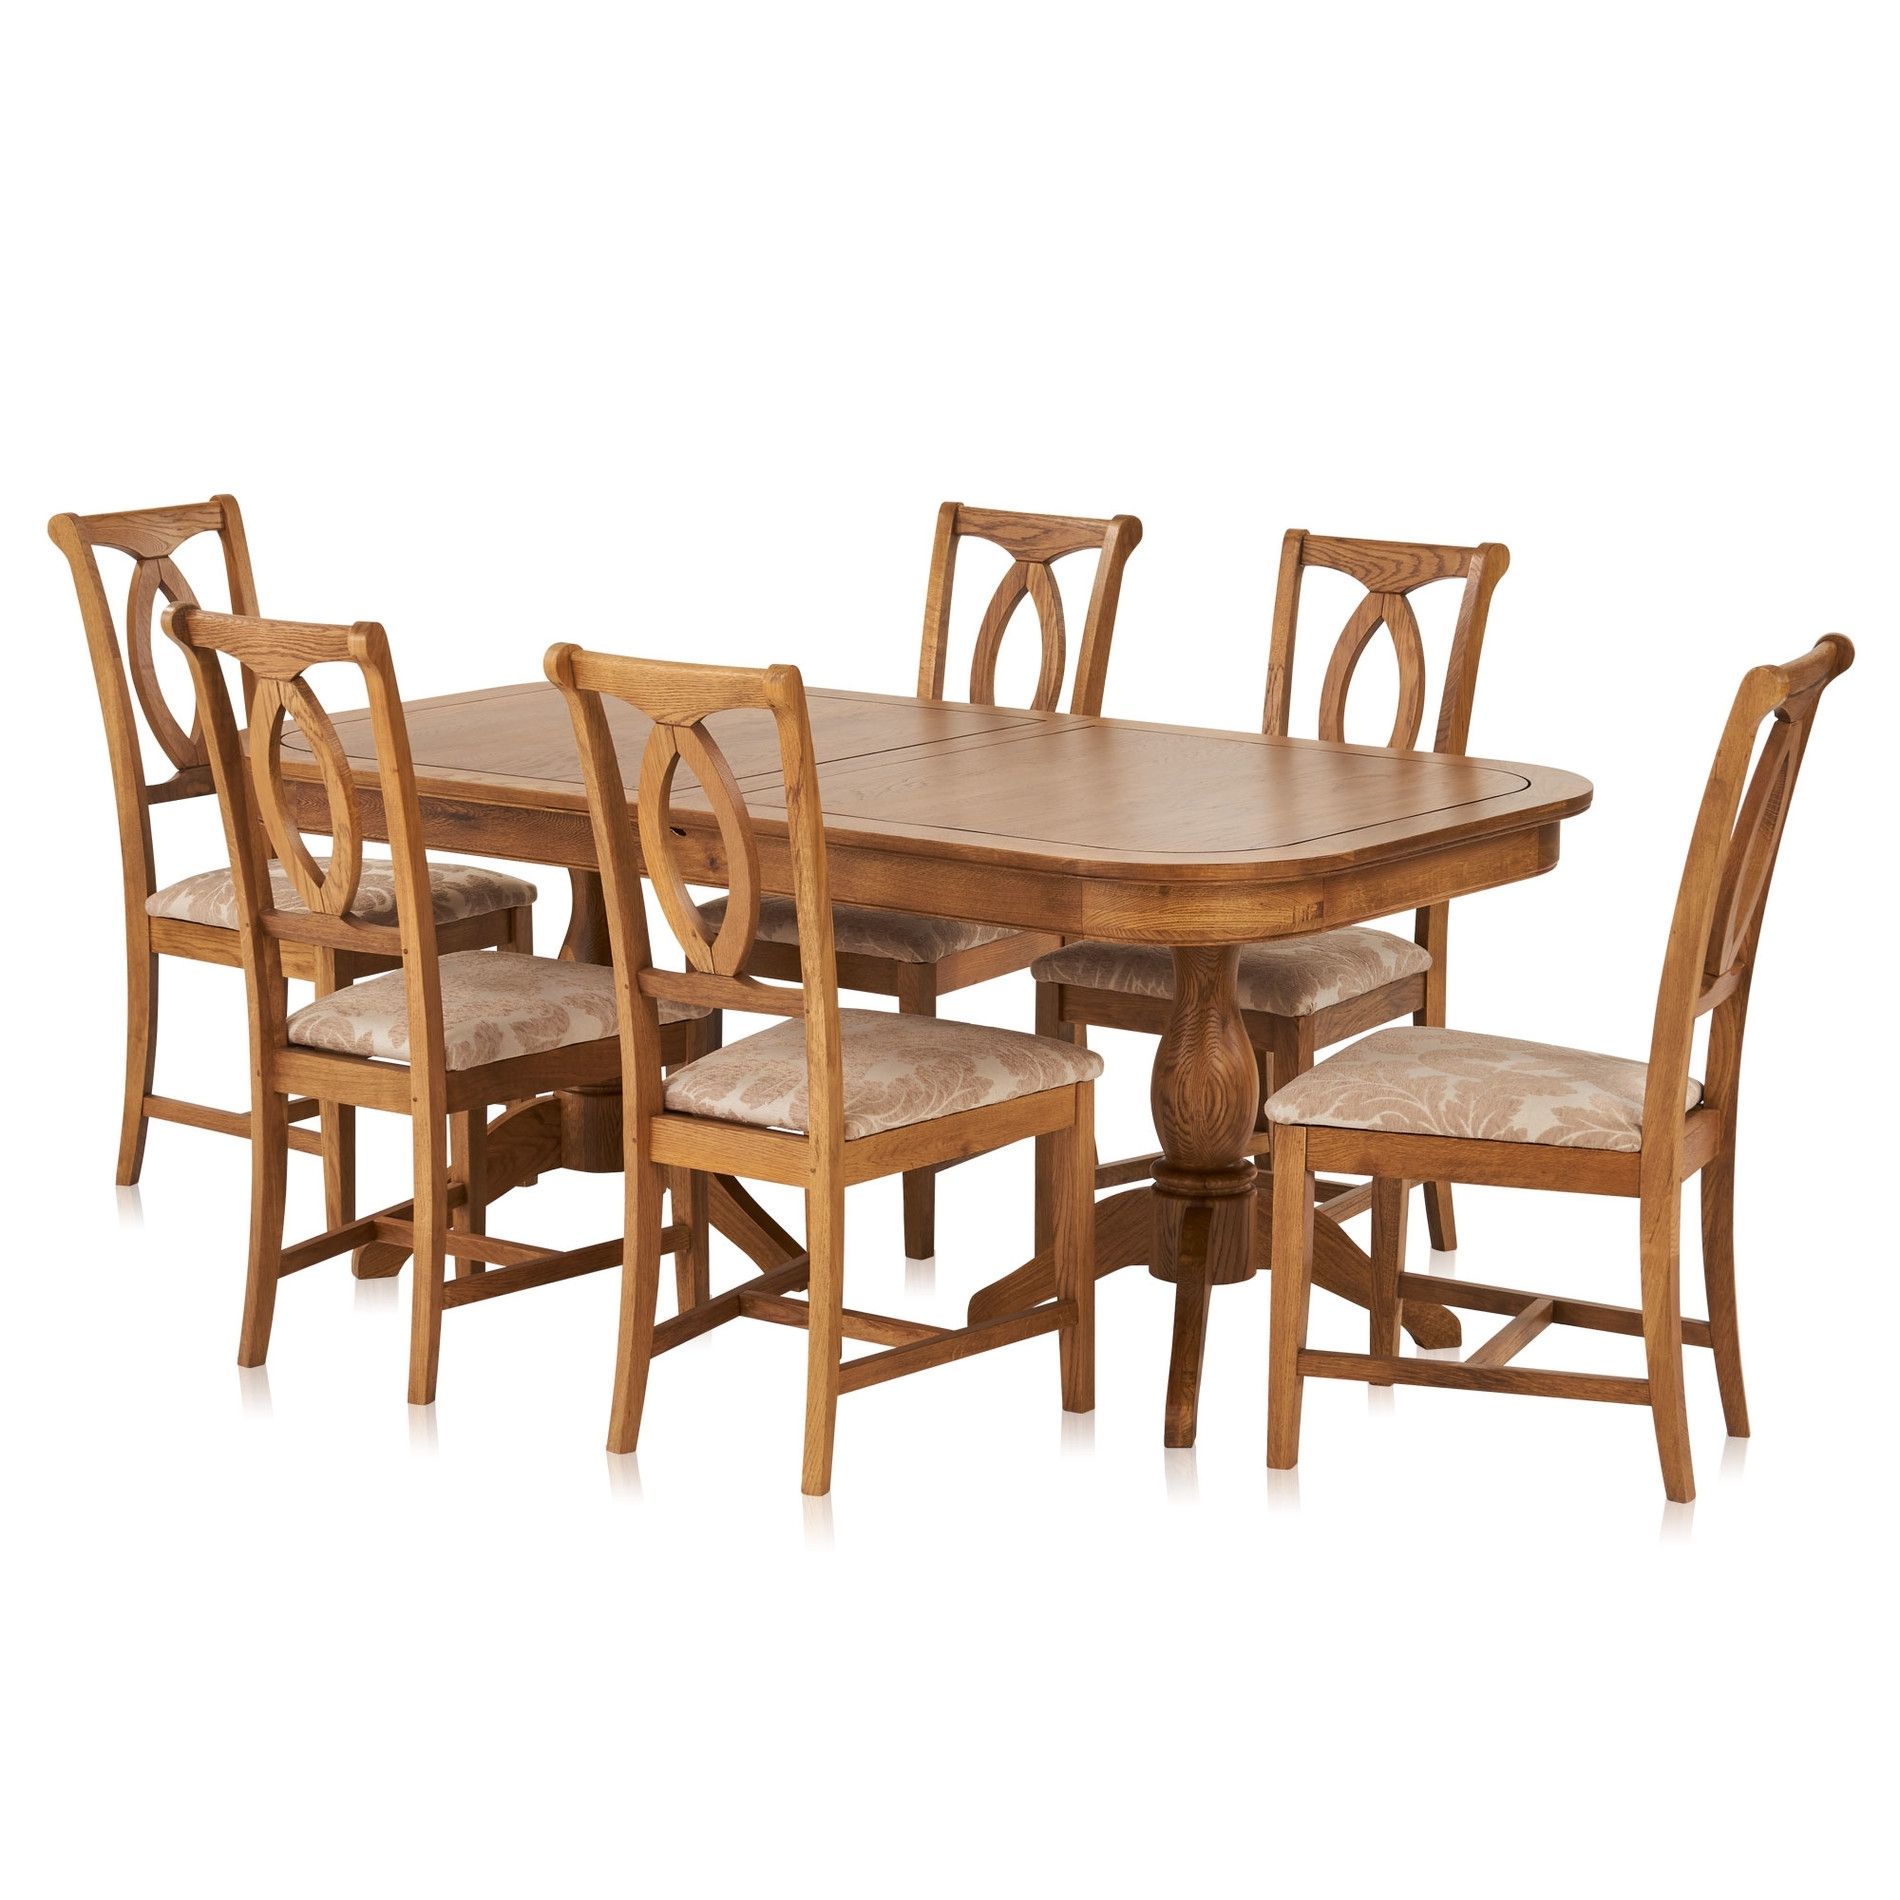 Crawford Extendable Dining Table And 6 Beige Chairs | Oak Furnitureland Intended For Newest Crawford 6 Piece Rectangle Dining Sets (View 10 of 20)